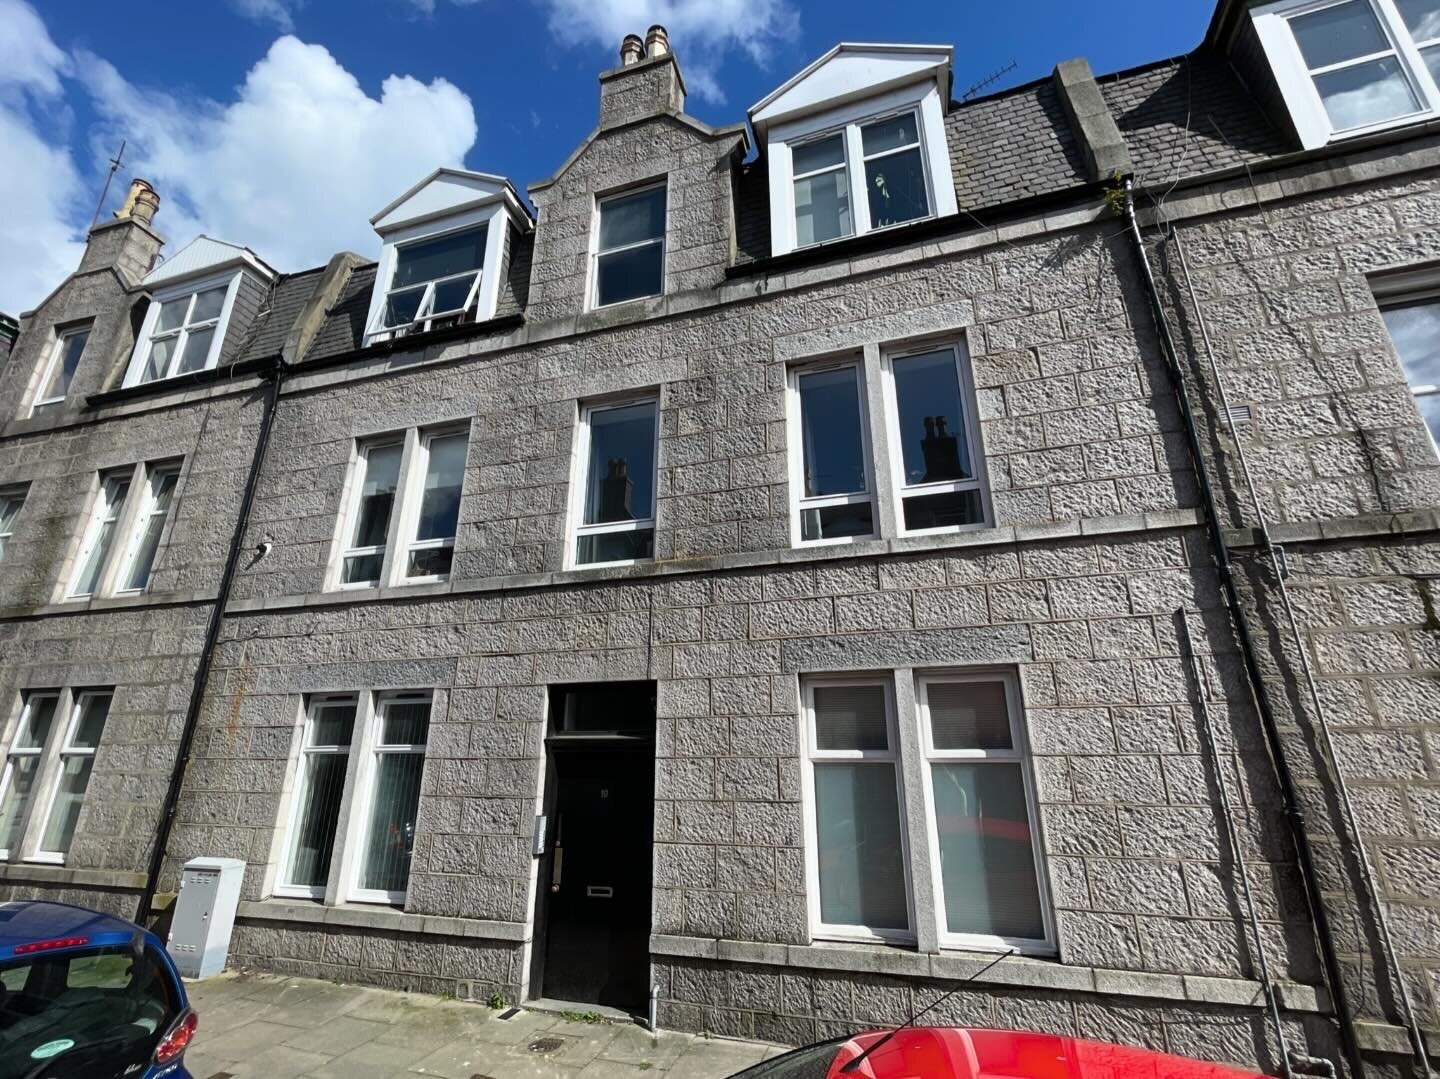 Another remortgage completed 🥳

Our second out of four in Aberdeen to get our money back out of. This has been a great deal for us, we secured it at &pound;51,000, tenanted it right away and spent nothing on refurb. 7 months of rental income with no